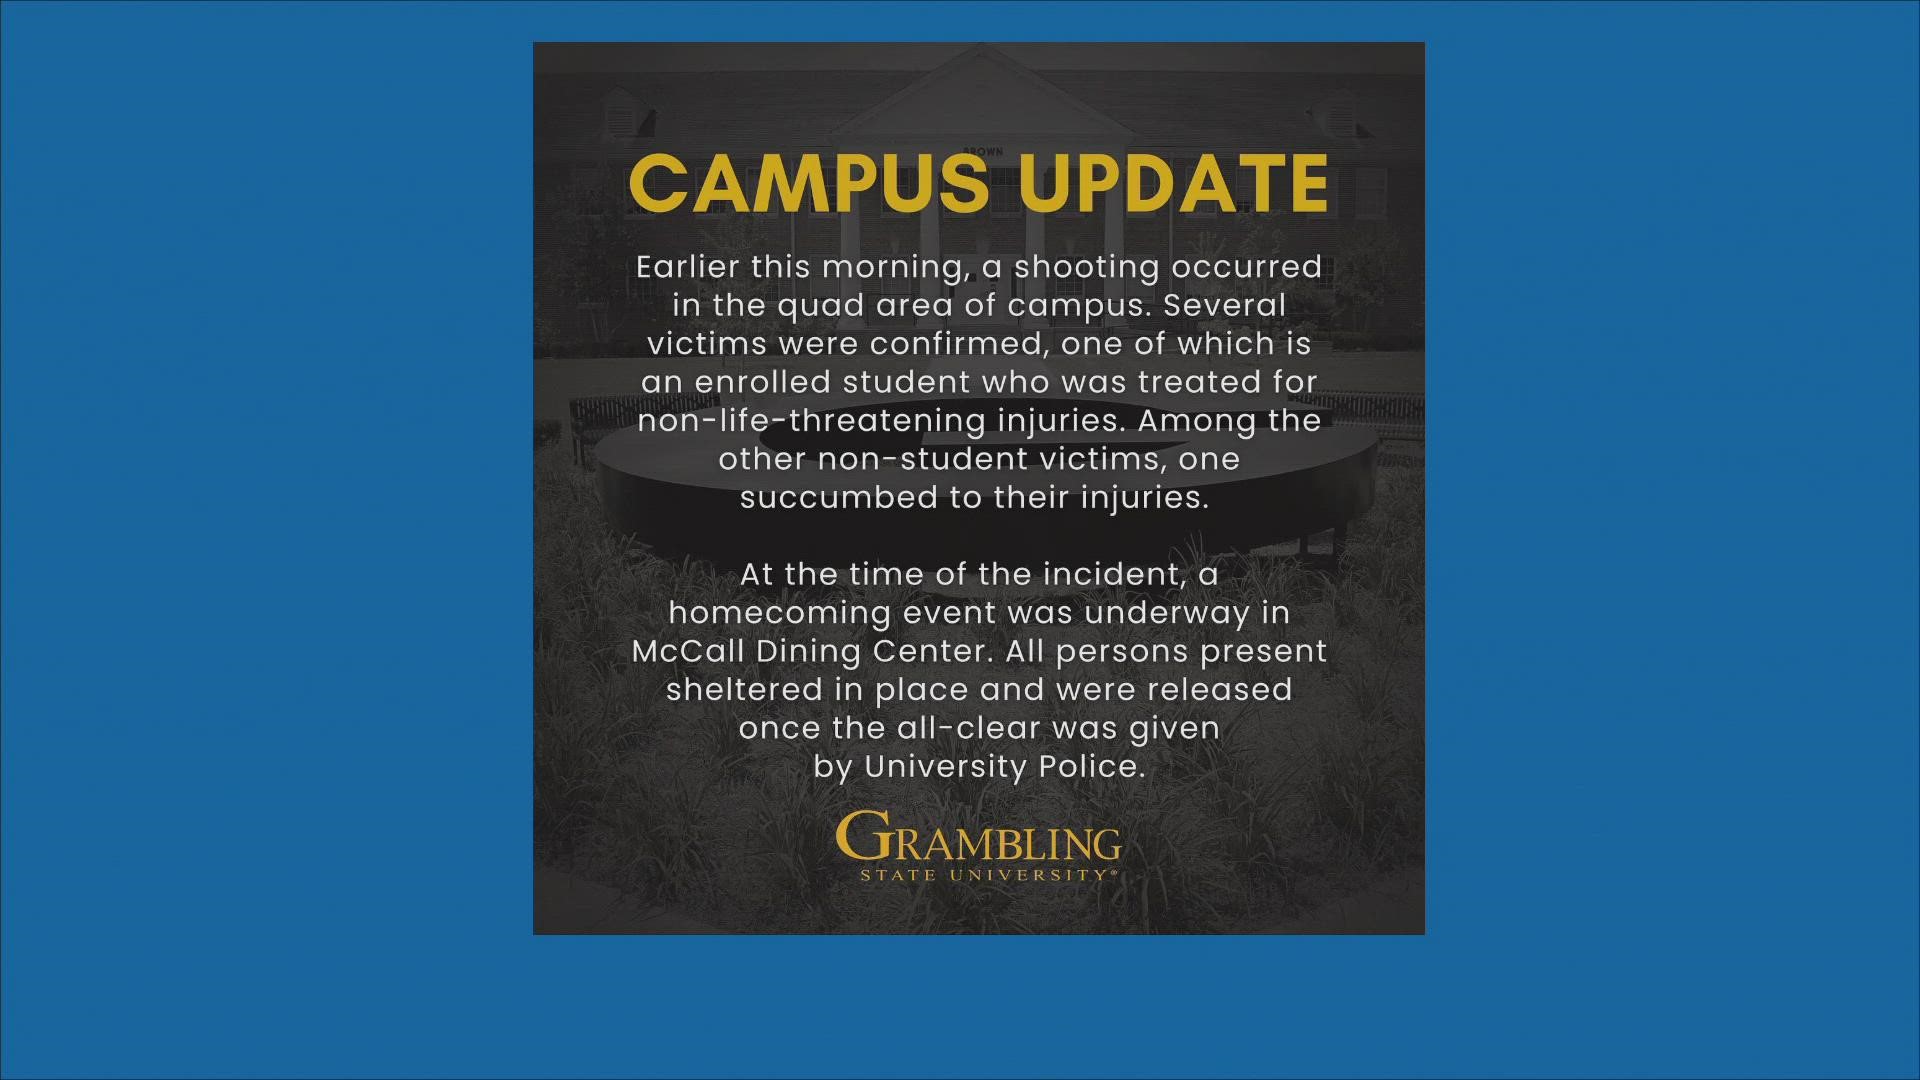 A person is dead after someone starting shooting at an on-campus homecoming event early Sunday morning. Investigations into the crime continue.